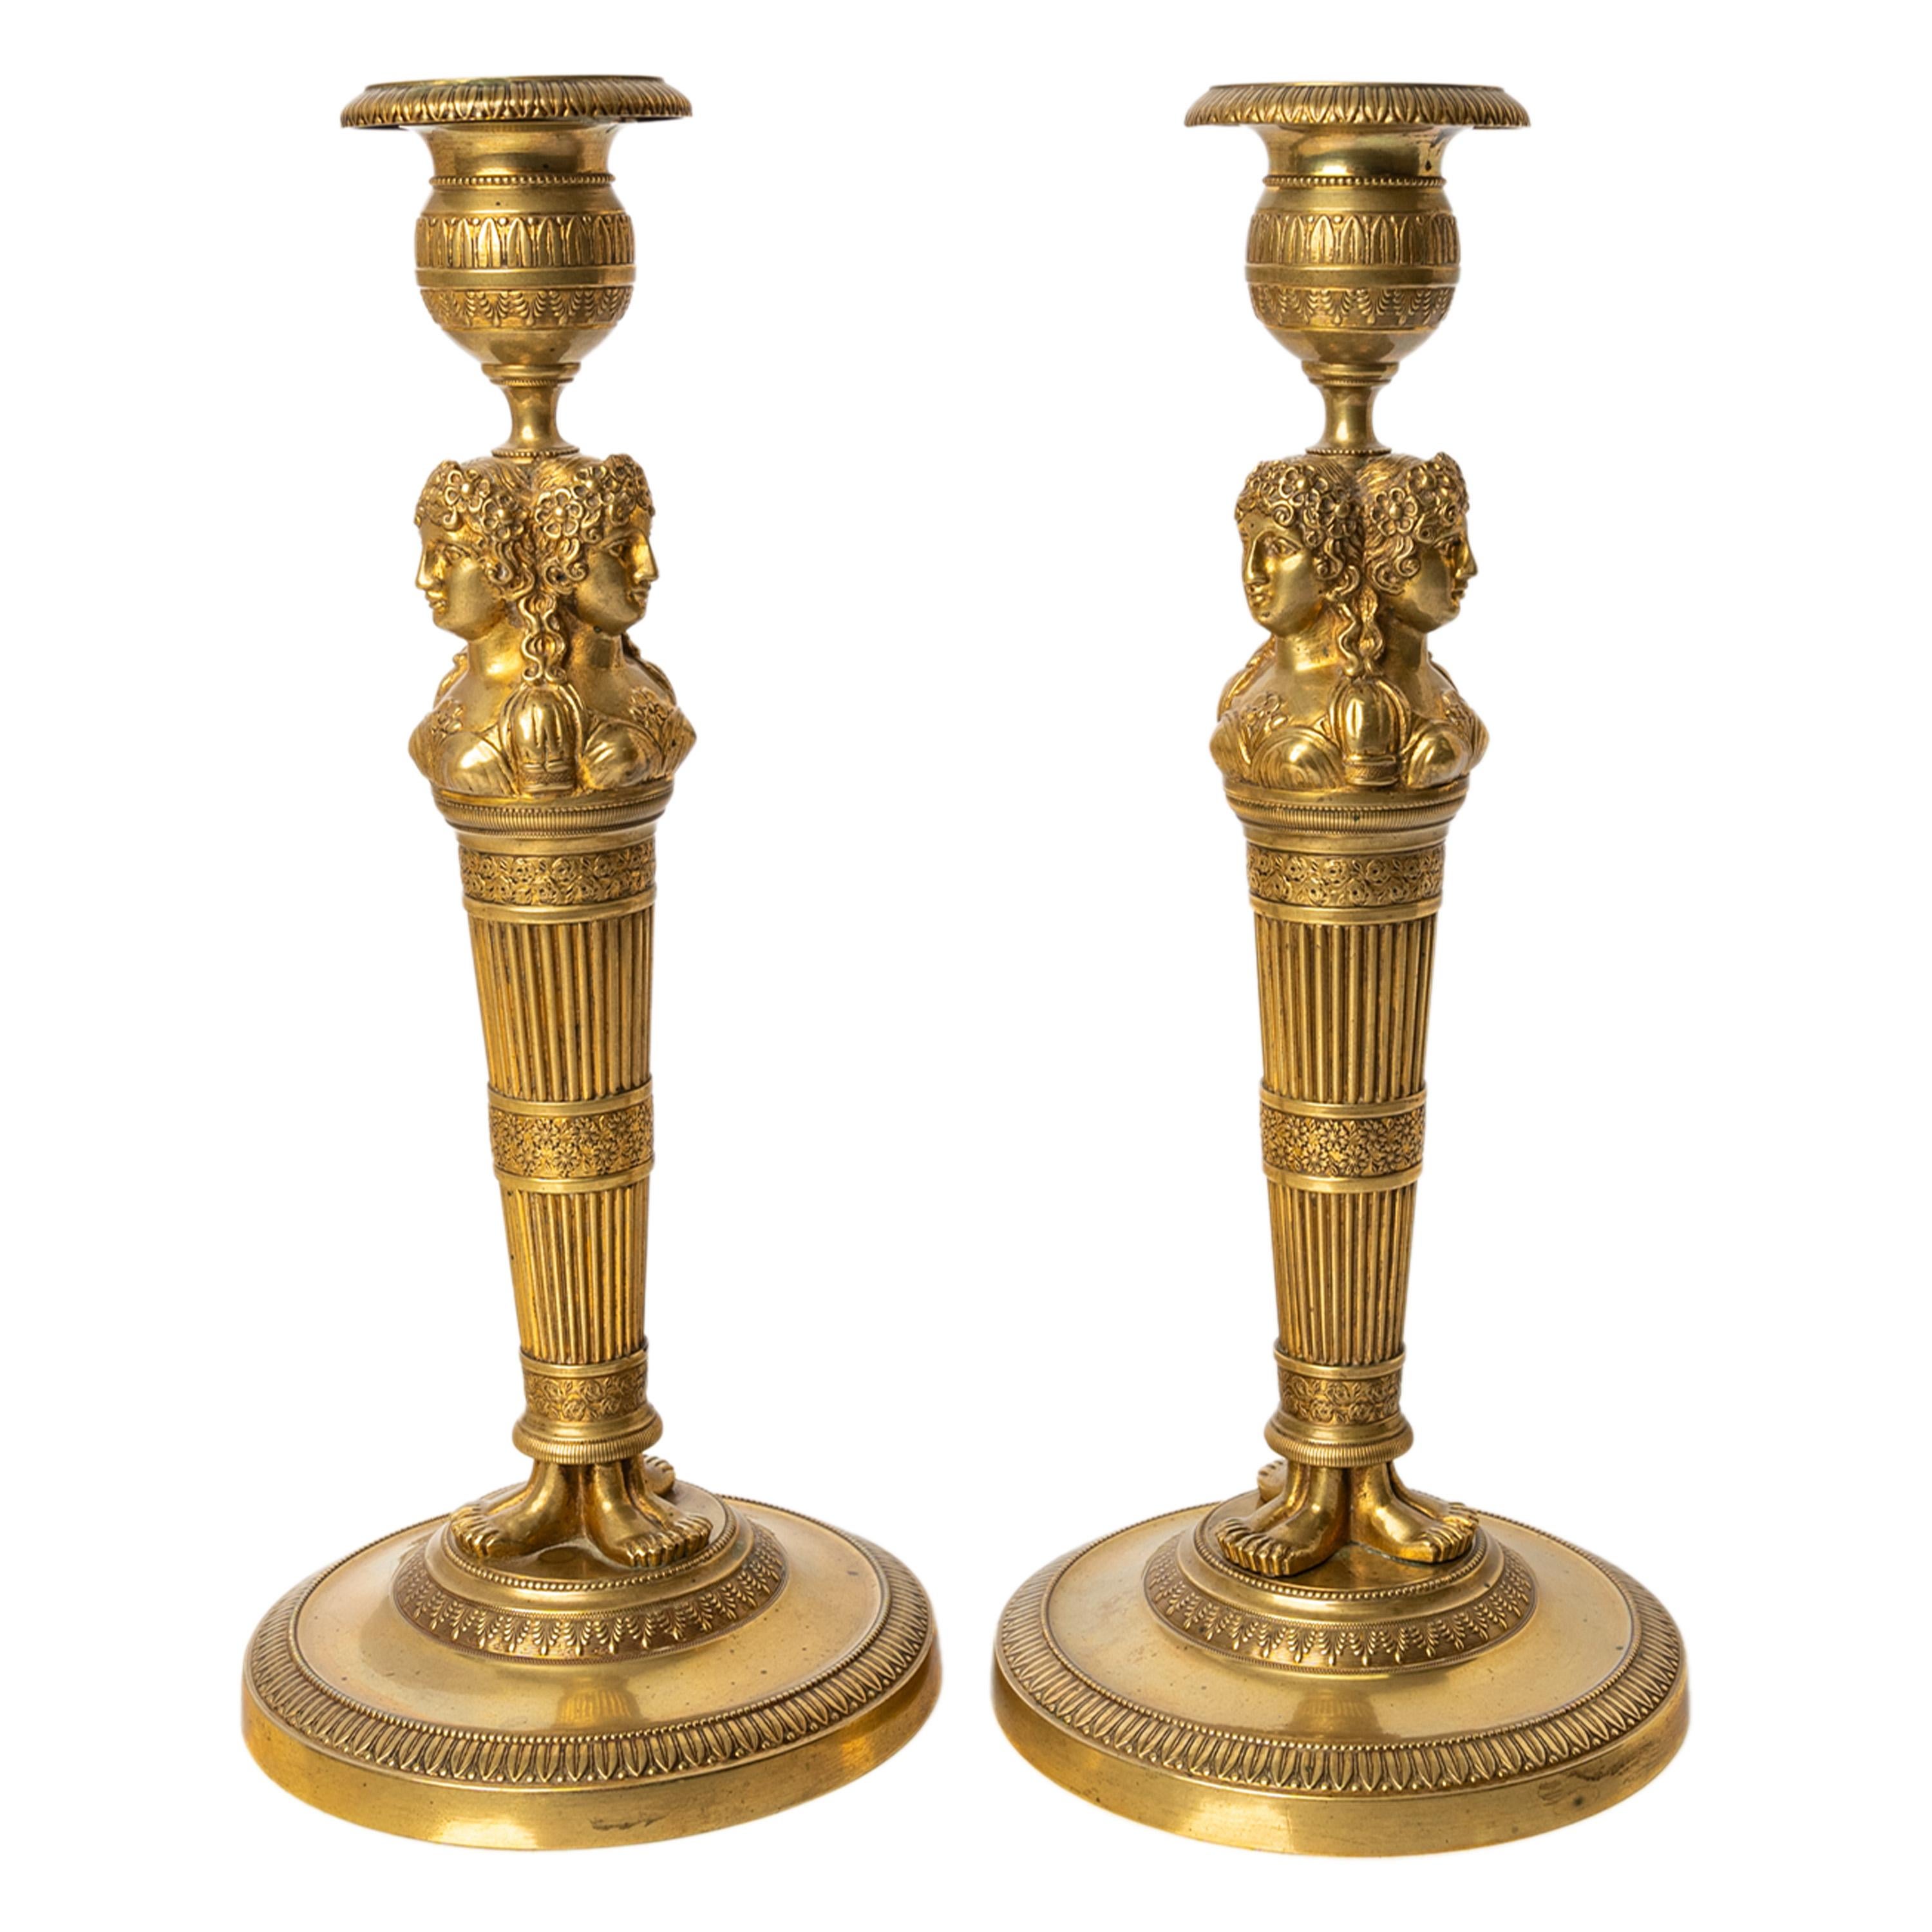 Pair Antique Early 19thC French Empire Neoclassical Gilt Bronze Candlesticks For Sale 3